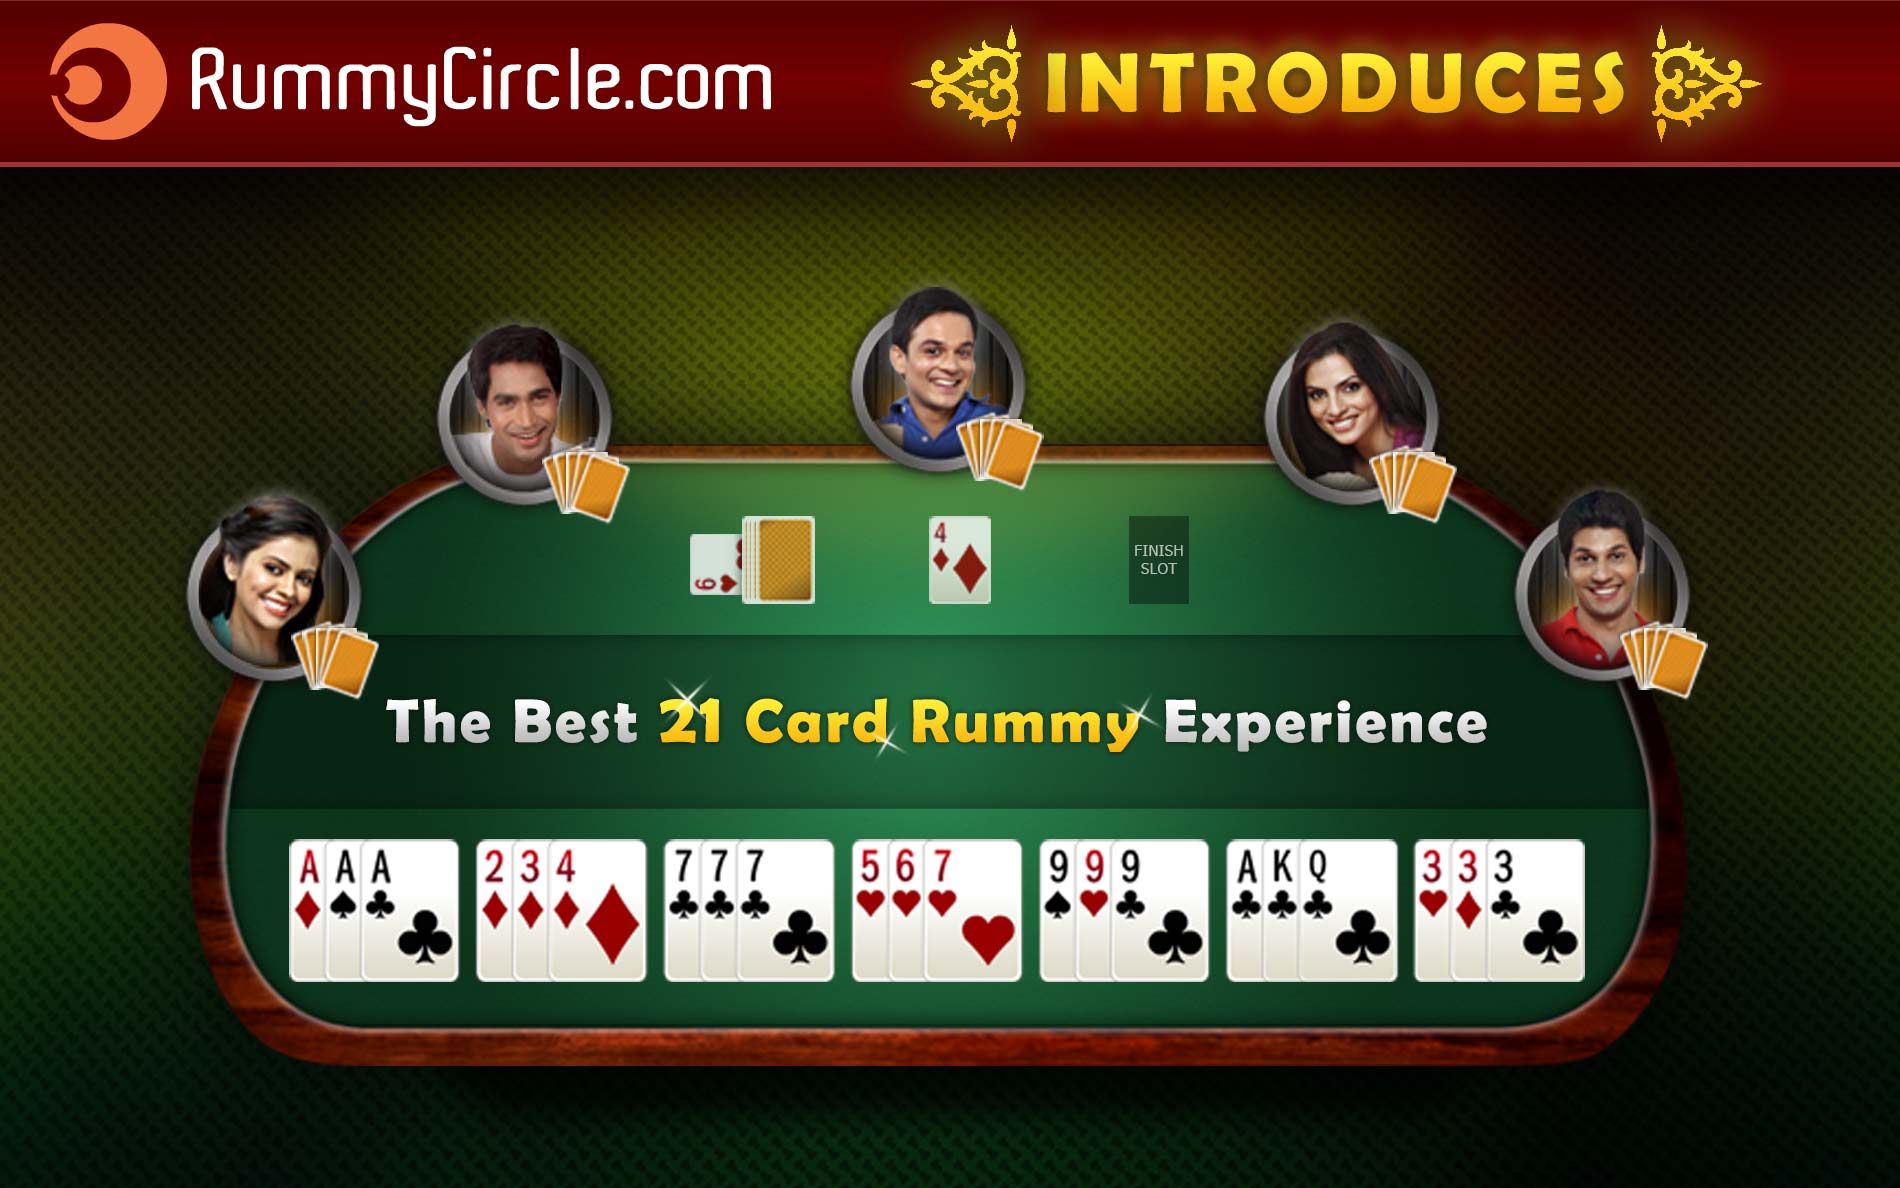 How to Play Rummy Circle in Hyderabad?